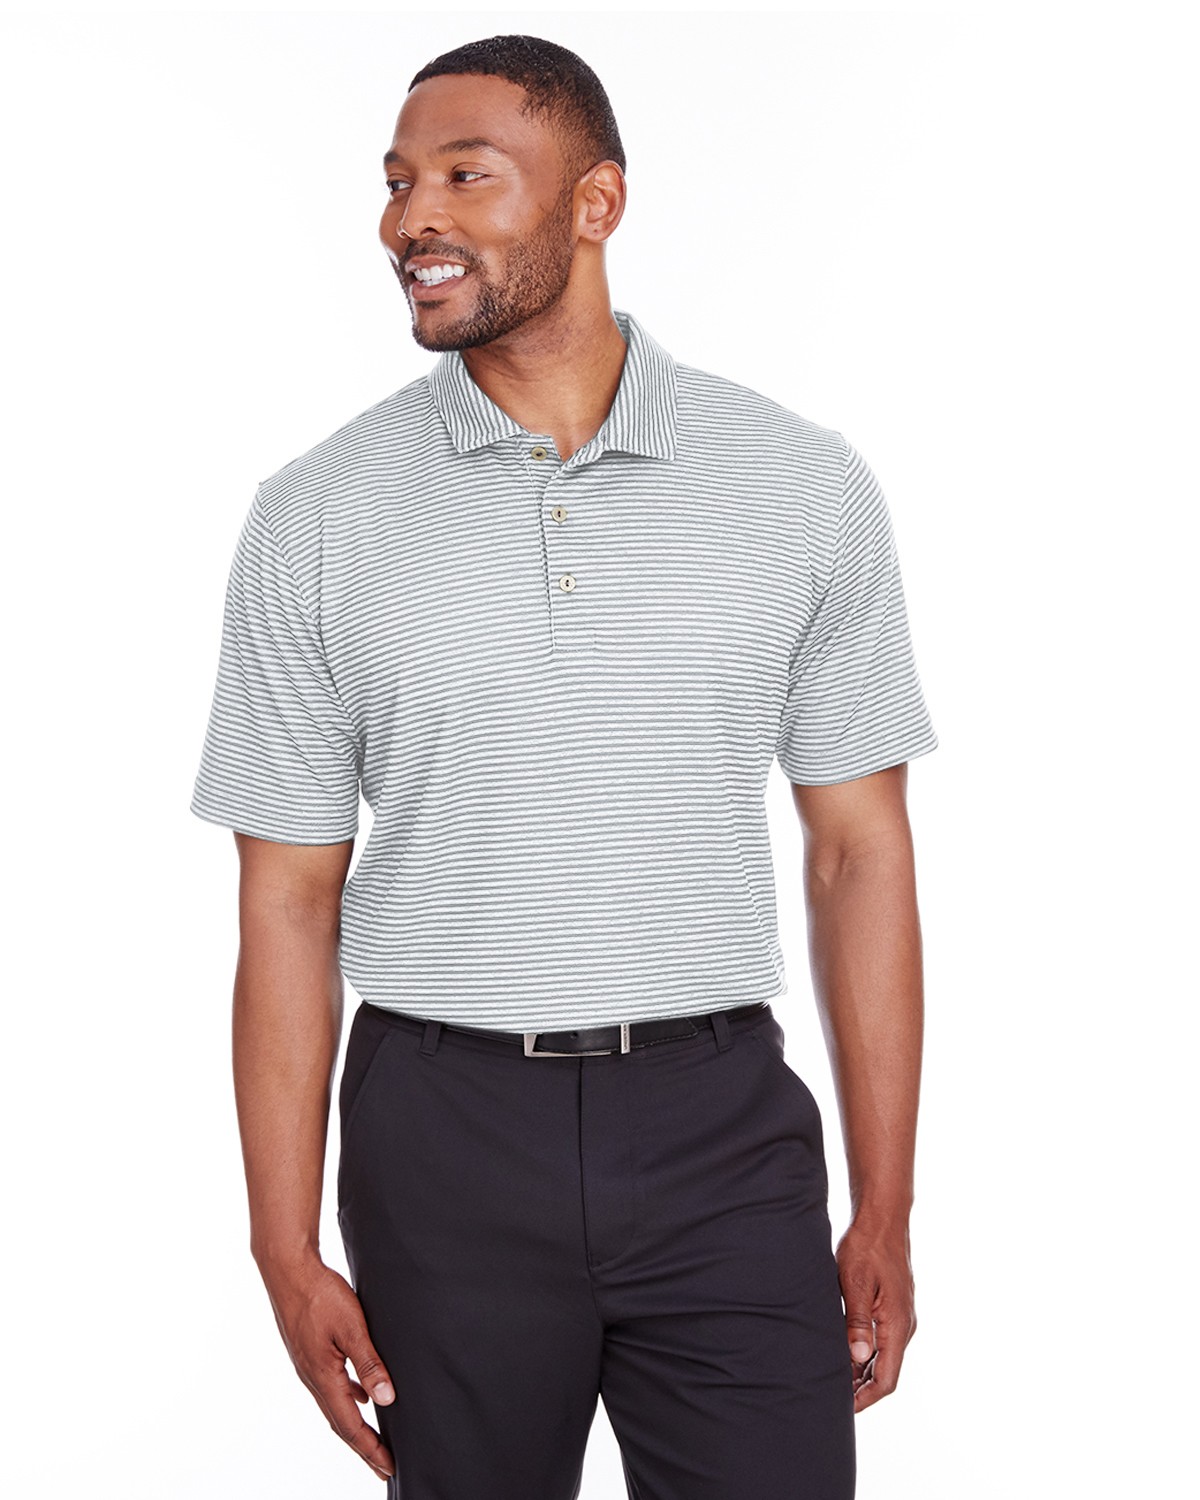 Puma 596804 Mens Performance Stripe Polo - Free Shipping Available